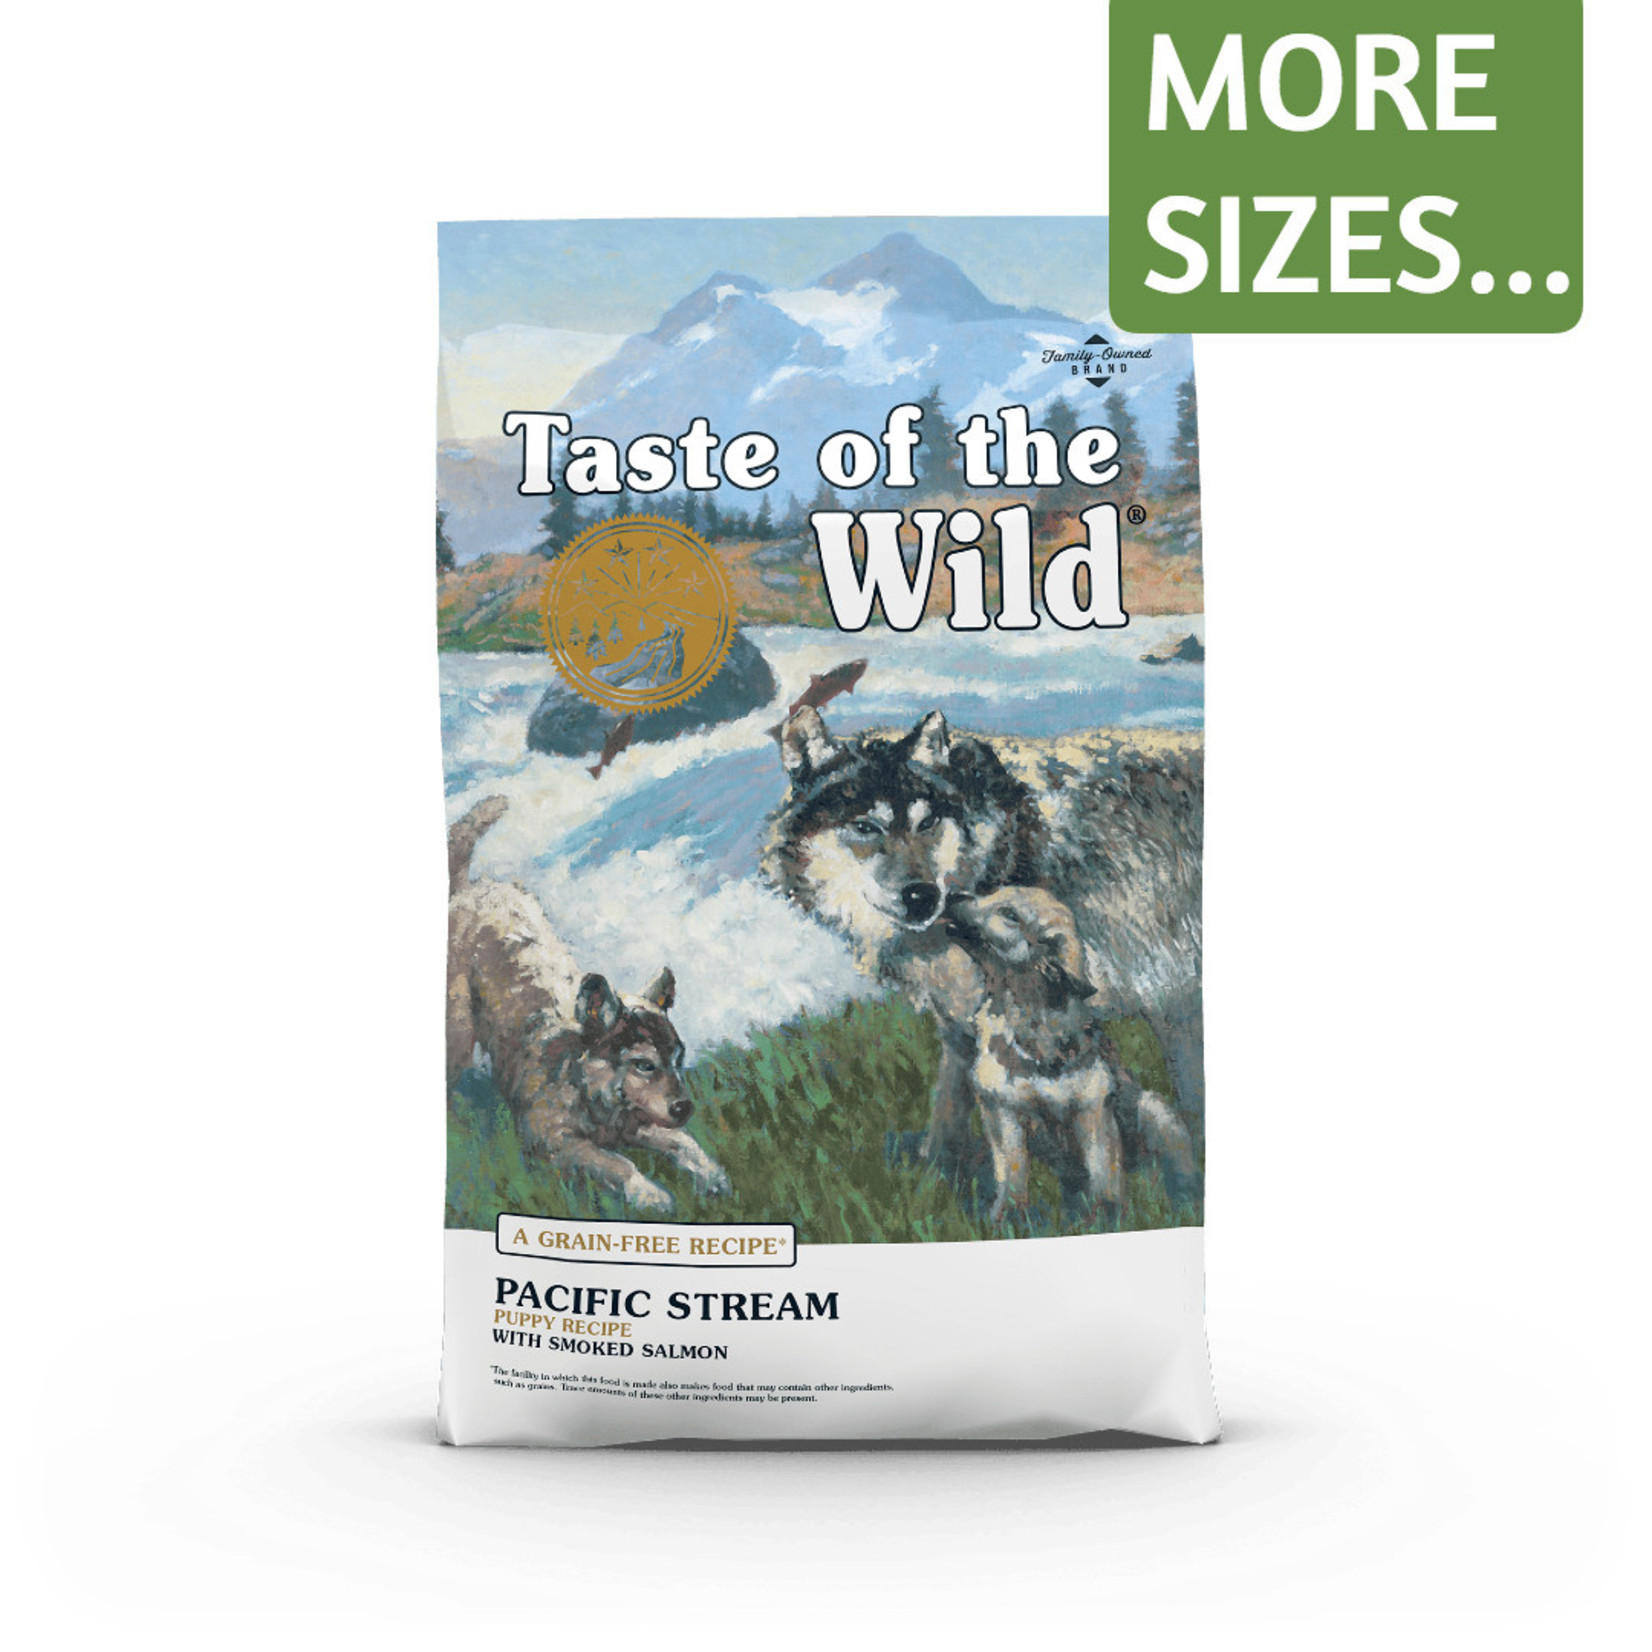 Taste of the Wild Taste of the Wild Dry Dog Food Pacific Stream Puppy Recipe with Smoked Salmon Grain Free